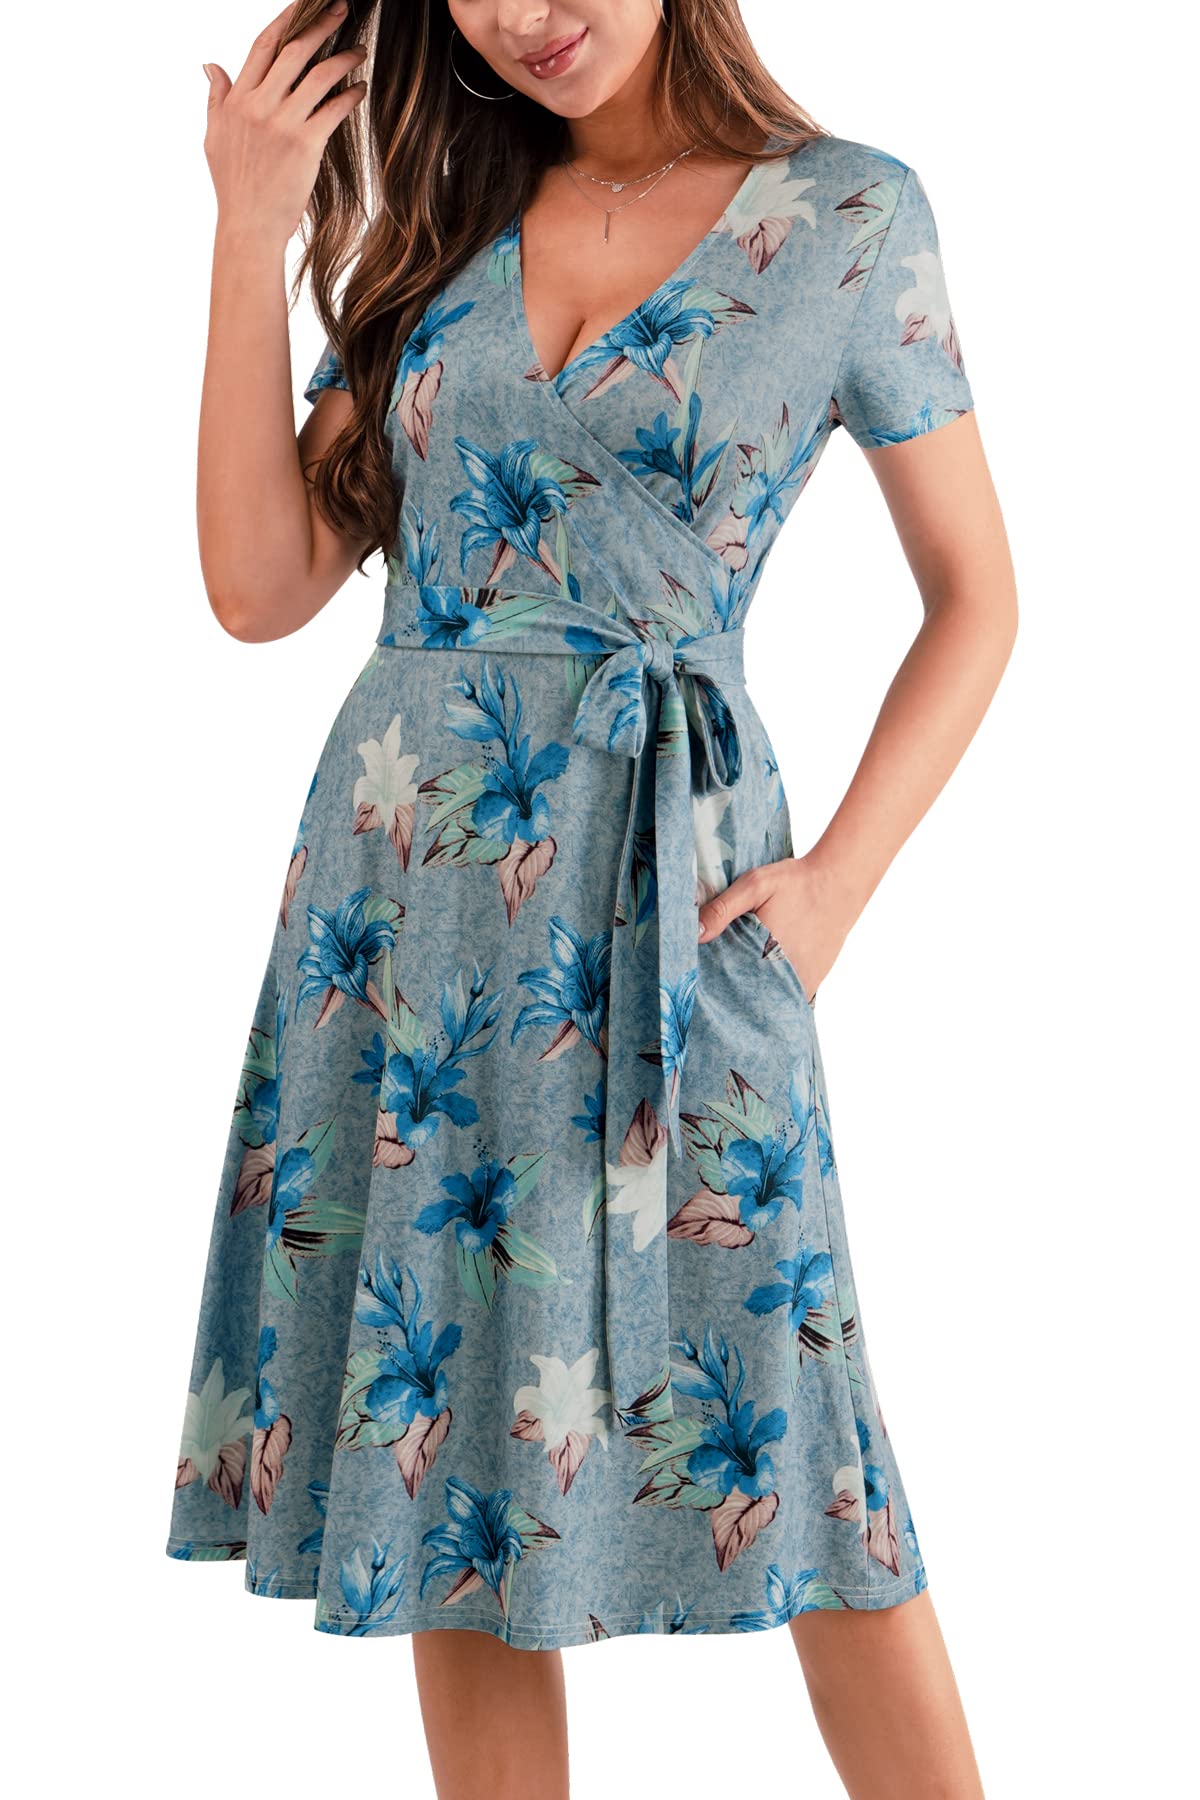 BAISHENGGT Blue Floral Women's Summer Short Sleeve Cross V Neck Casual Tie Waist Swing Beach Party Dress with Pockets